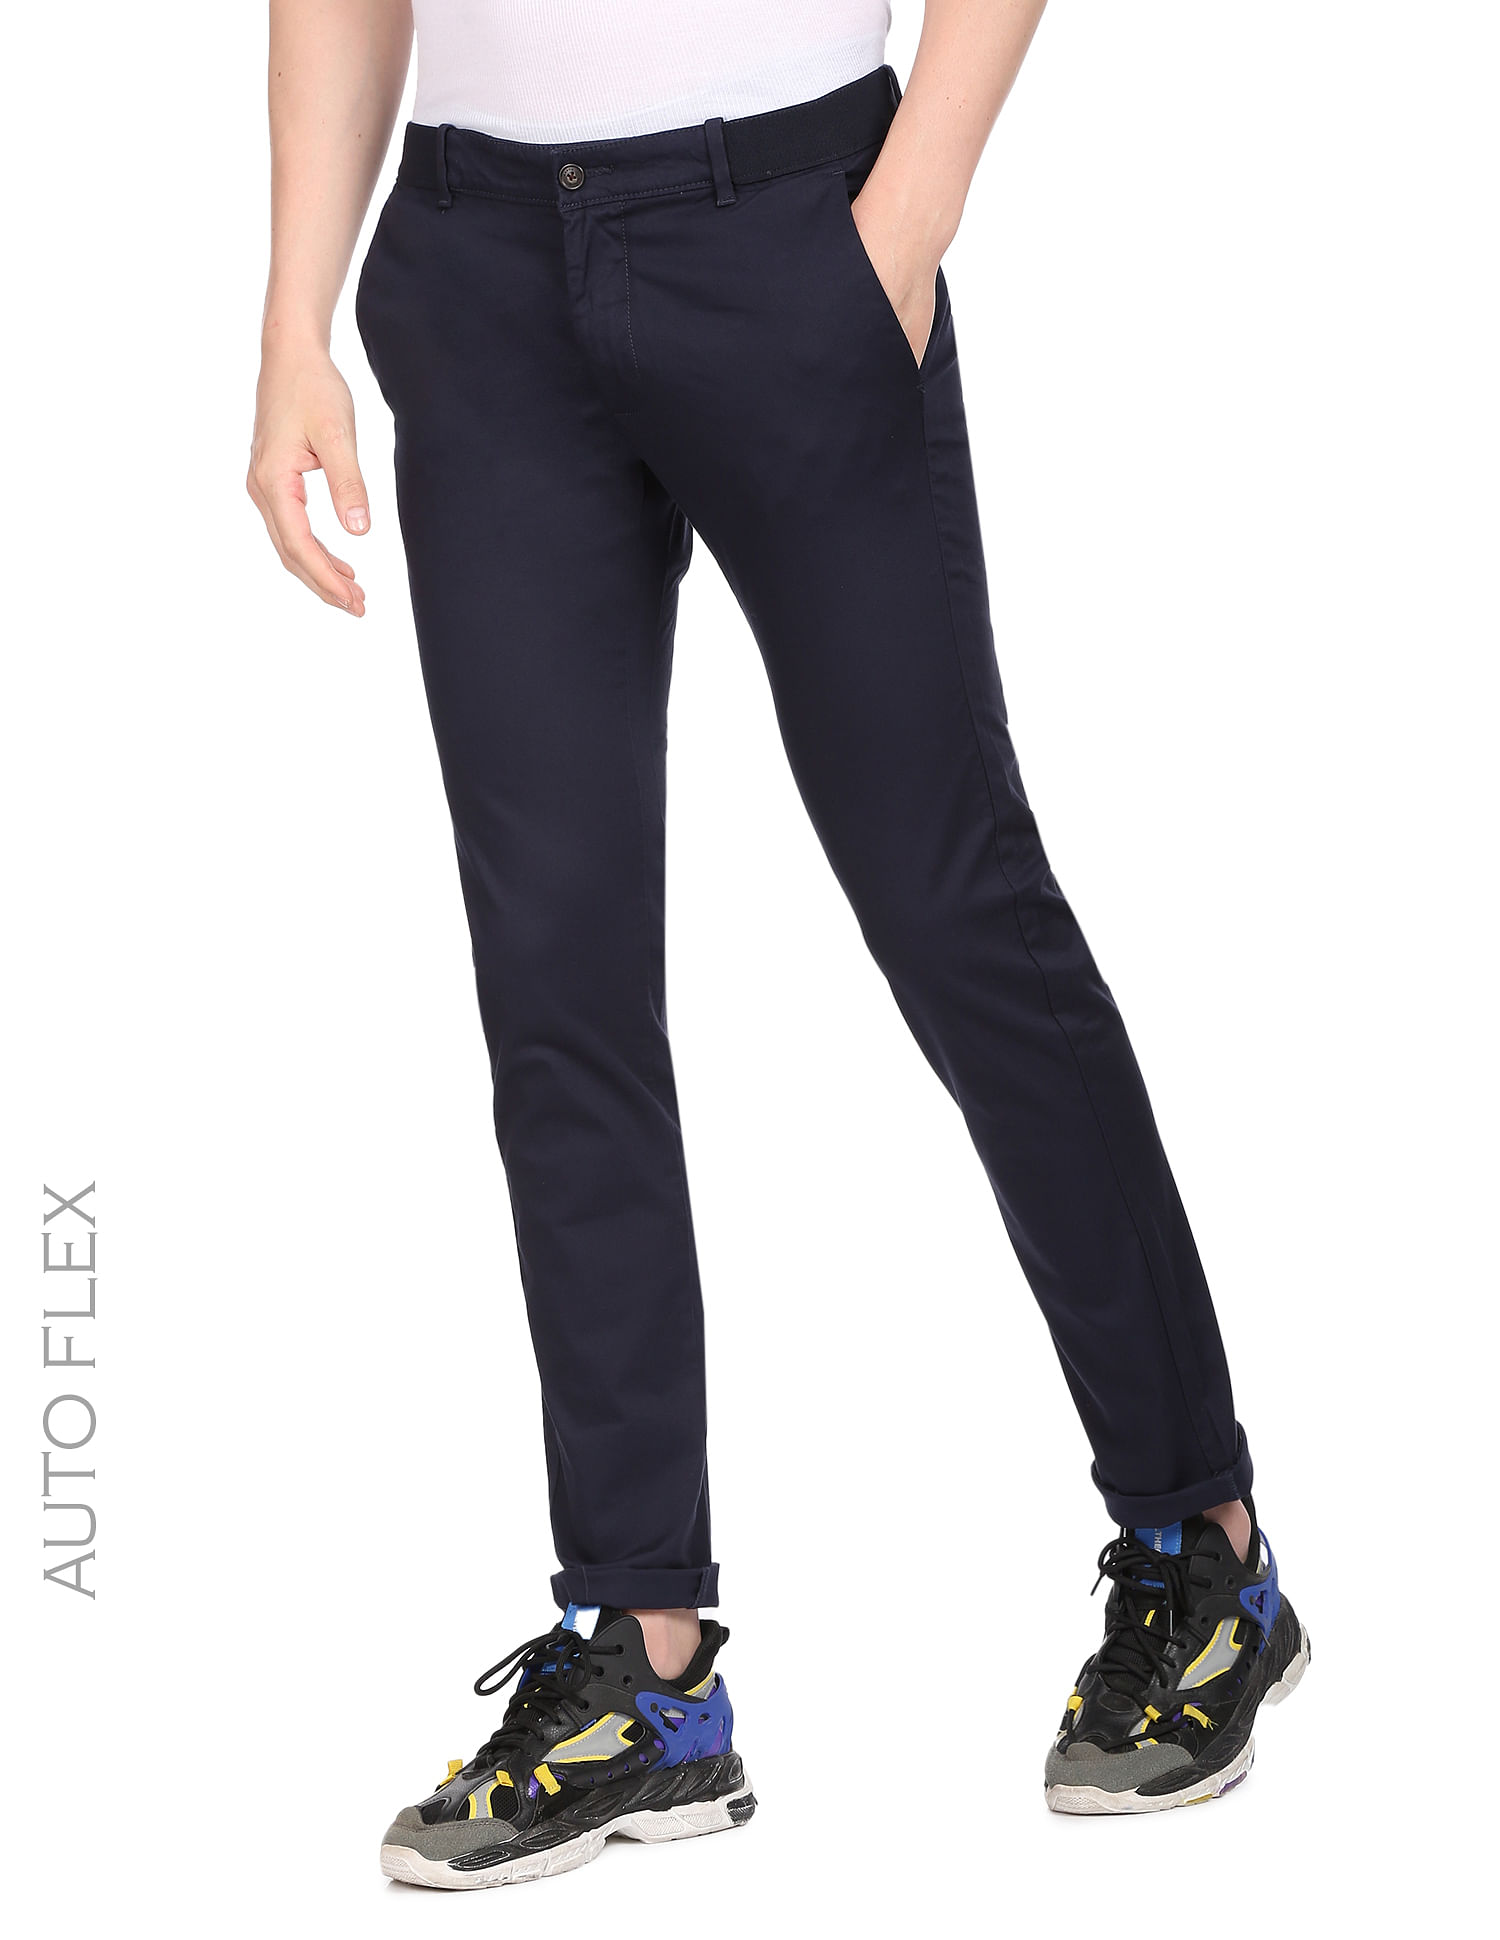 Sports Bands Trousers  Buy Sports Bands Trousers online in India